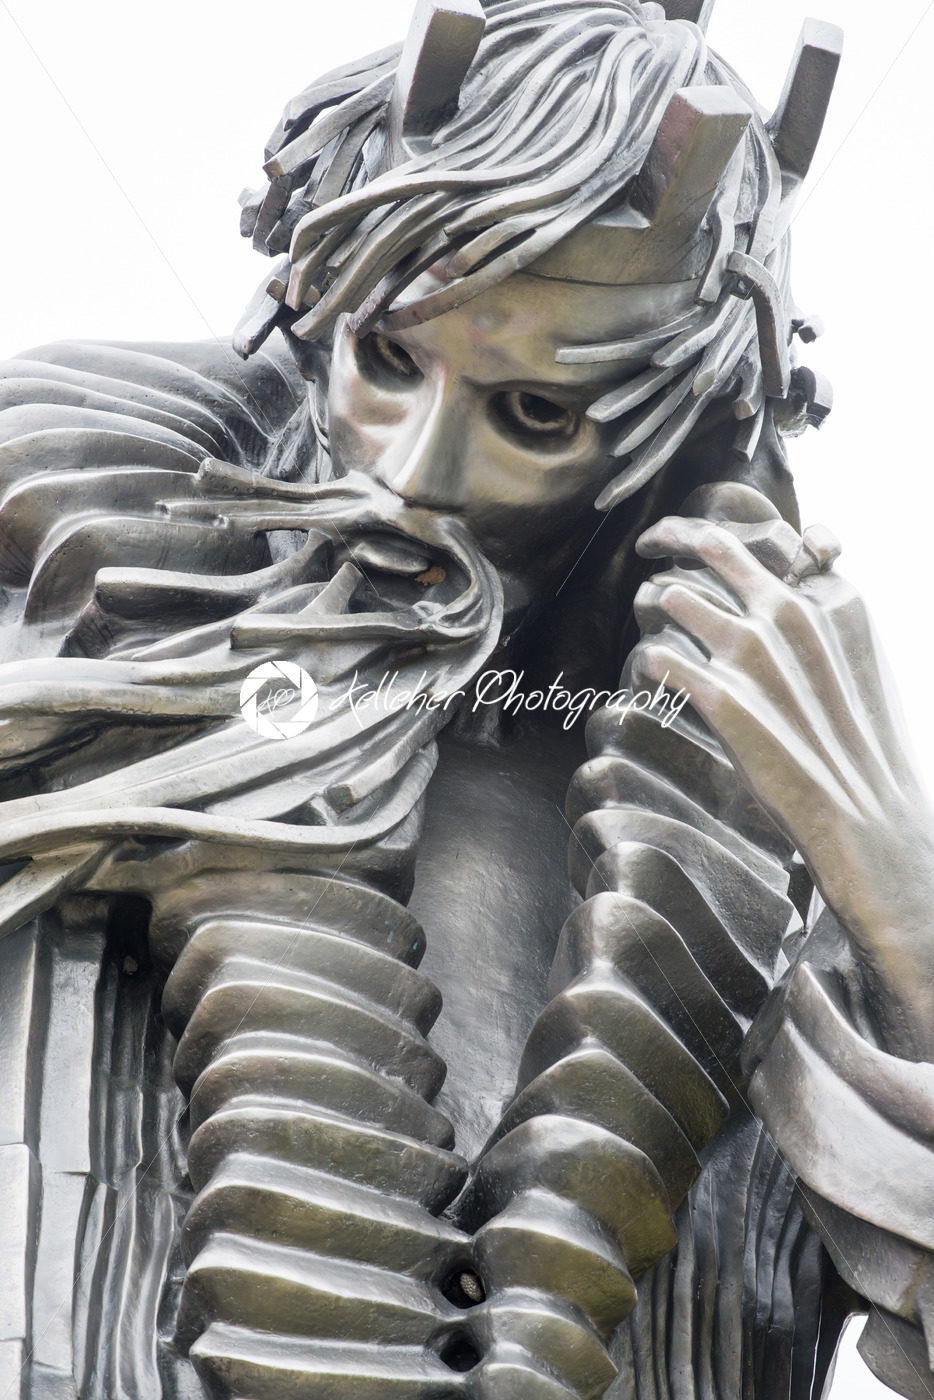 TRENTON, NJ – JUNE 17, 2017: King Lear by Seward Johnson at Grounds for Sculpture - Kelleher Photography Store